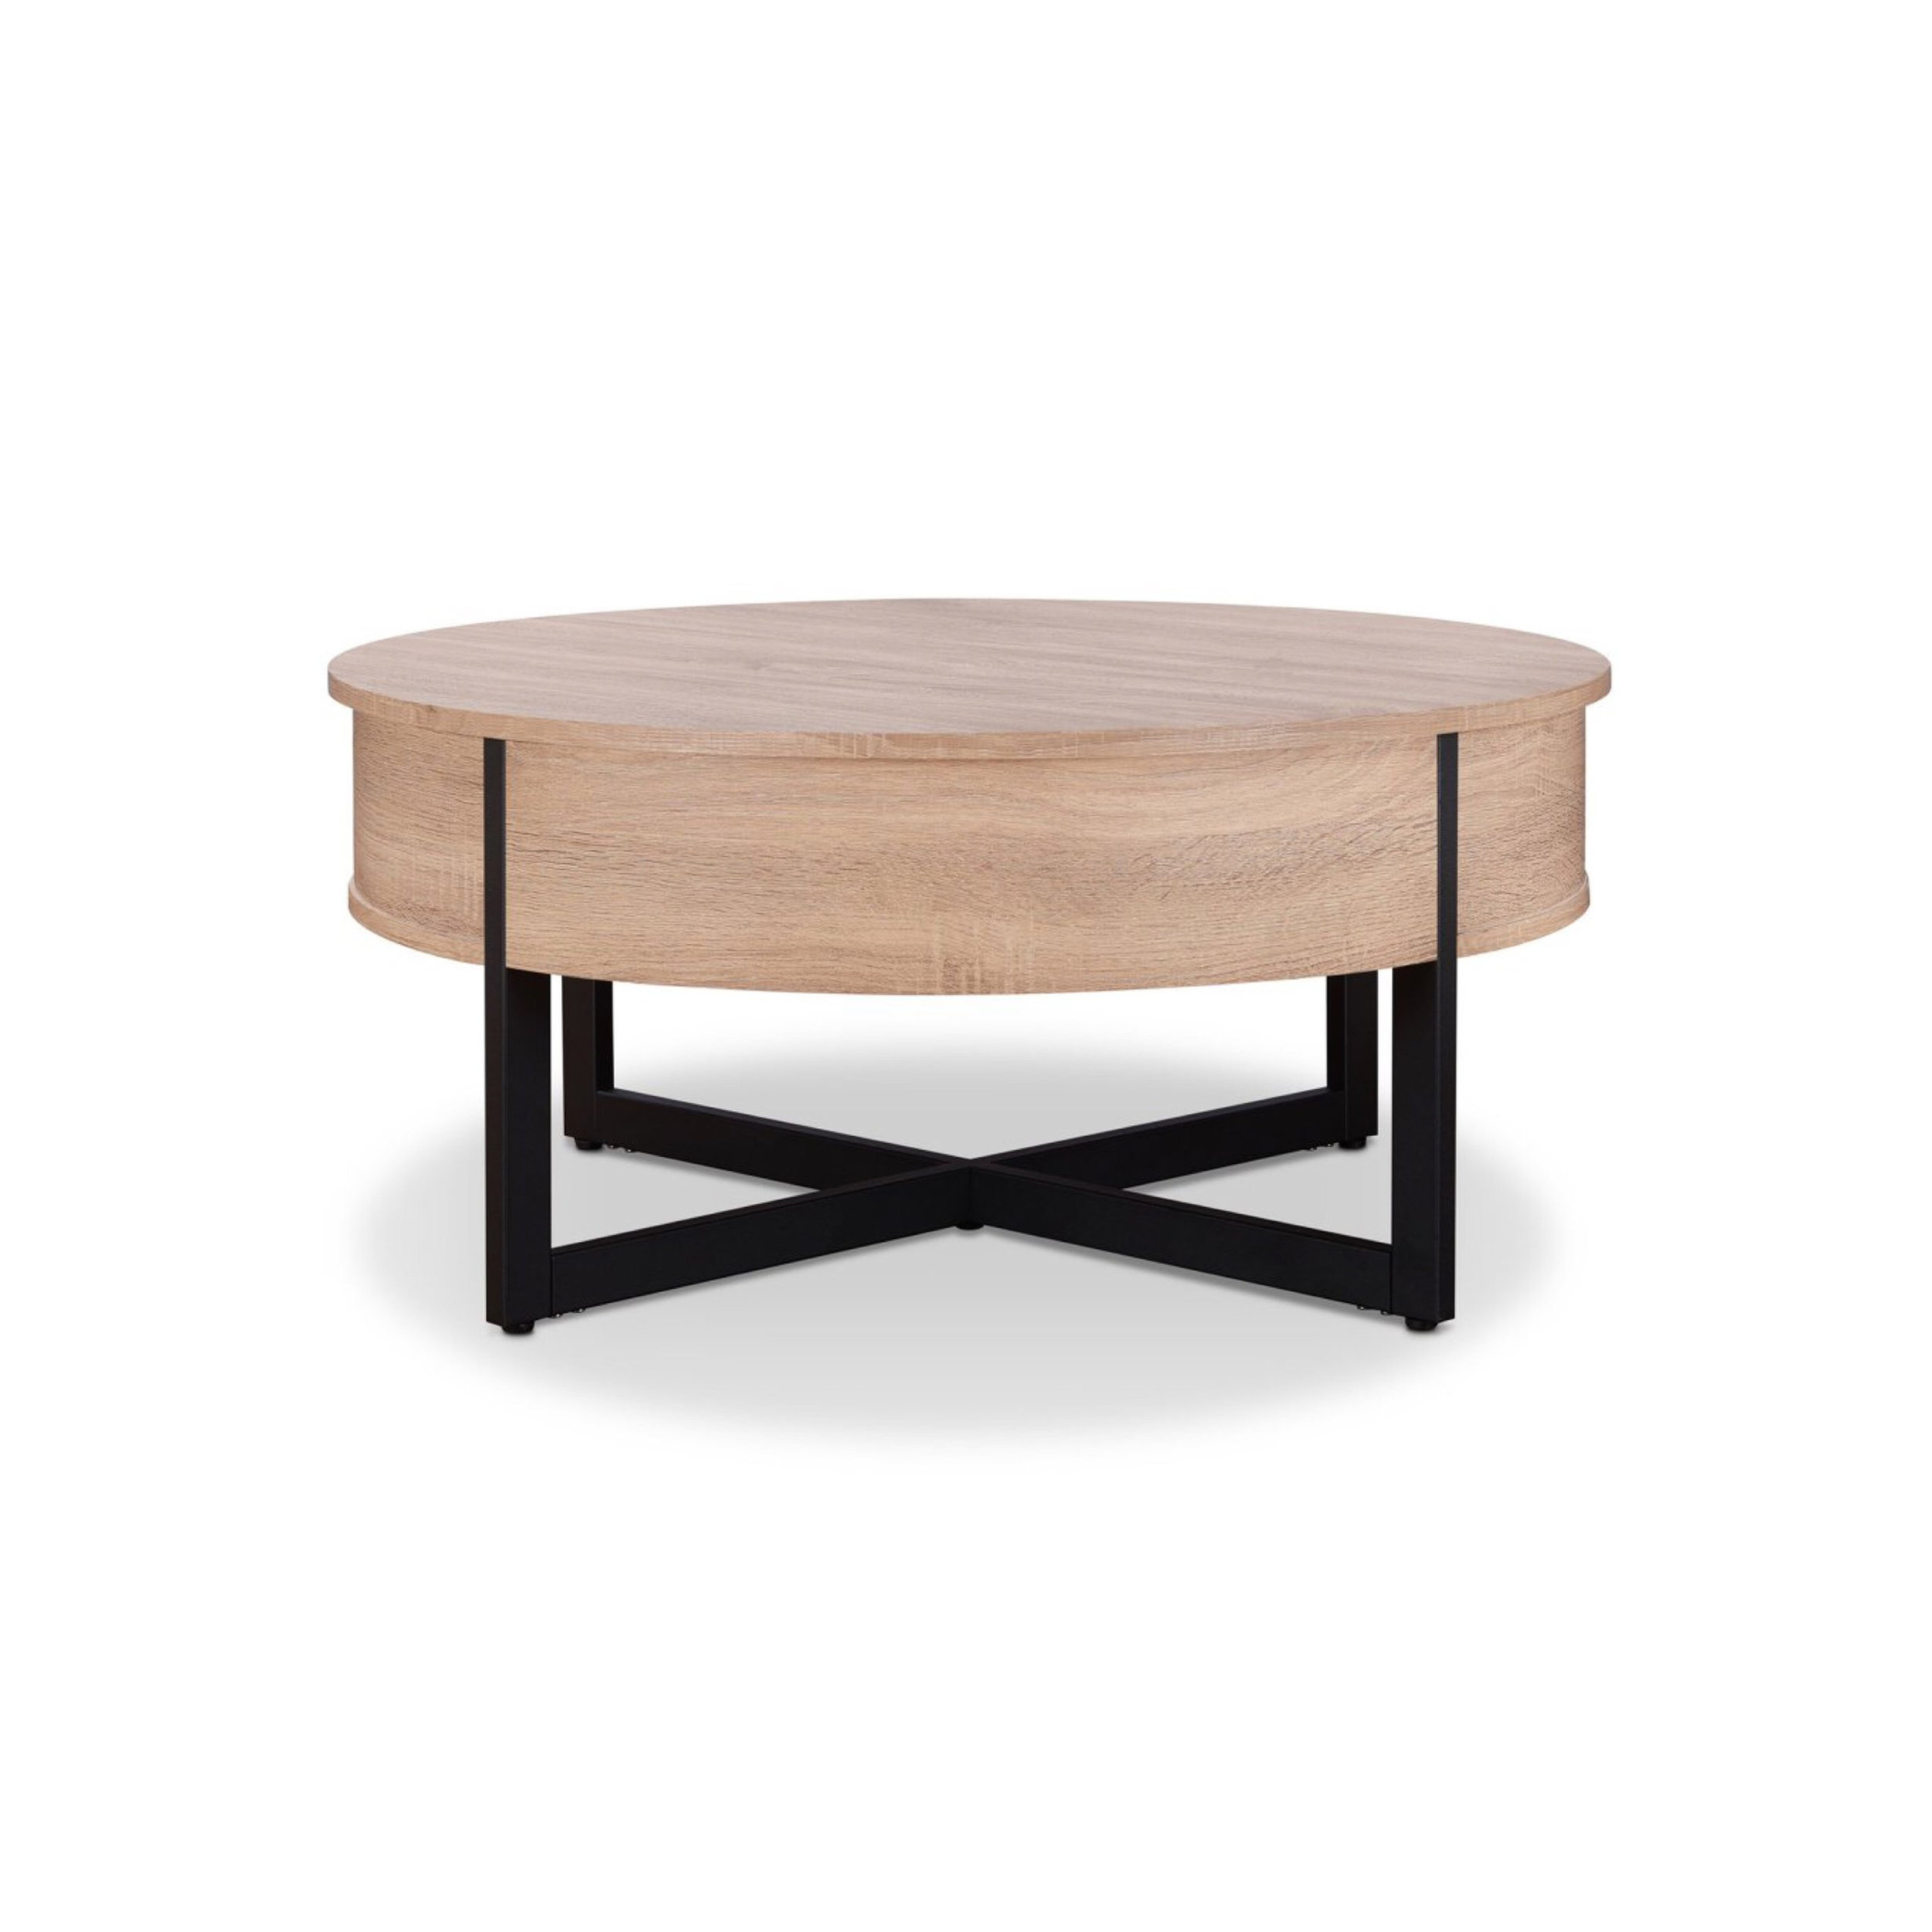 Featured image of post Black Wood Coffee Table Round / Pairing cool black steel and natural wood, this stunning coffee table is sure to make a statement in your living room.